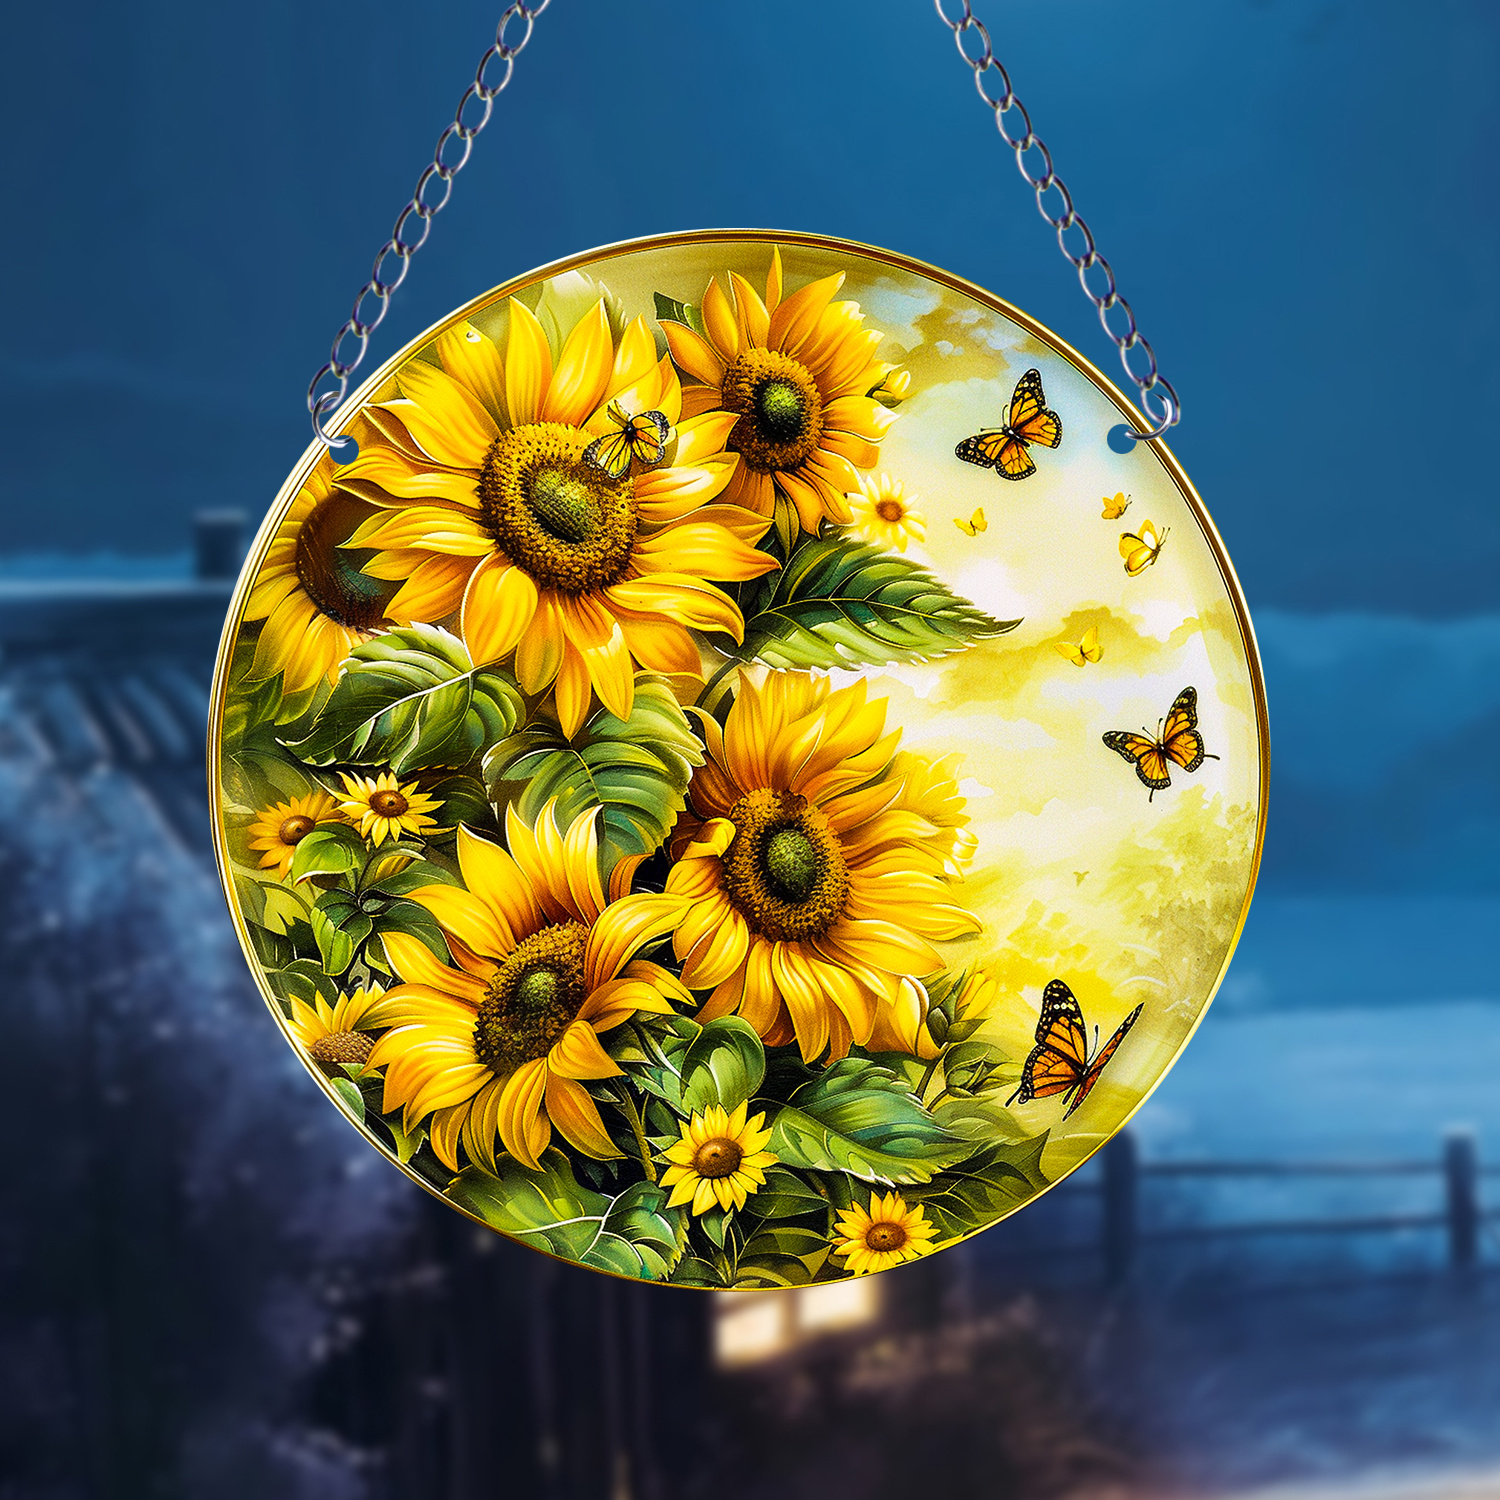 

1pc Sunflower Window Suncatcher Hanging Decor, 15cm Round Stained Acrylic Wall Art, Classic Style For Garden, Home, Office Decor, Bar And Window Accent, Housewarming, Friends, Family, Colleague Gift